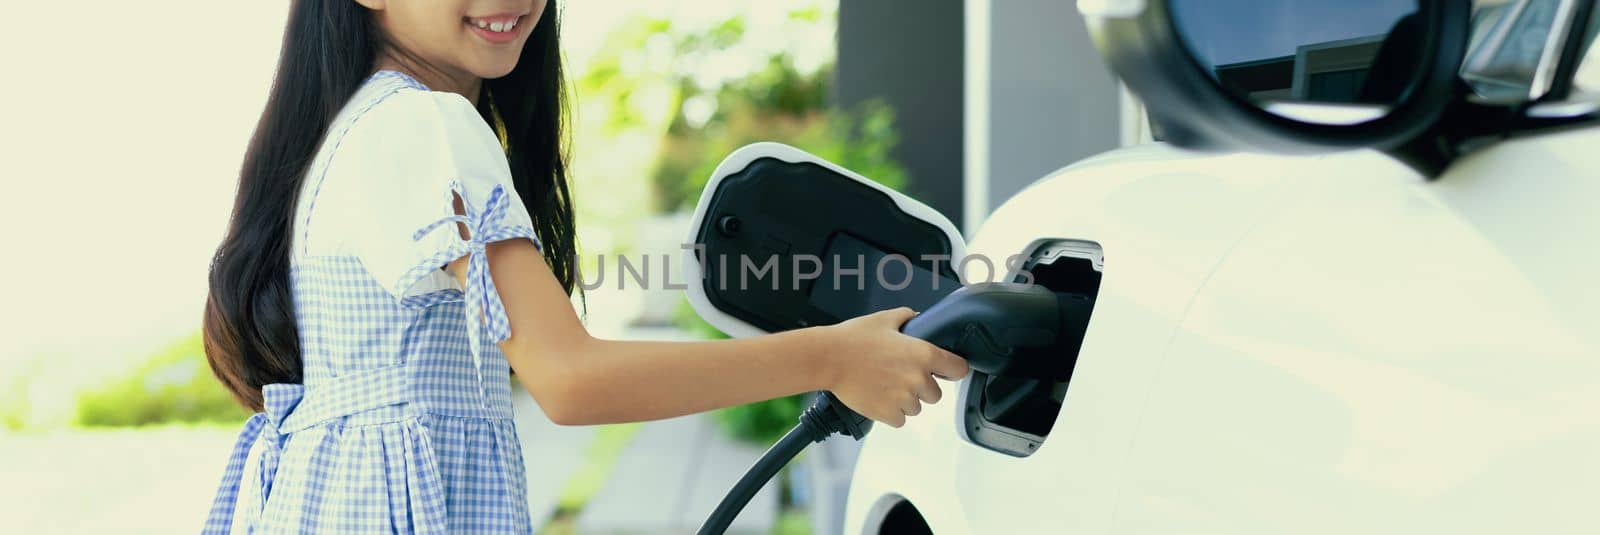 Sustainable power source for progressive lifestyle shown by a girl hold EV plug by biancoblue